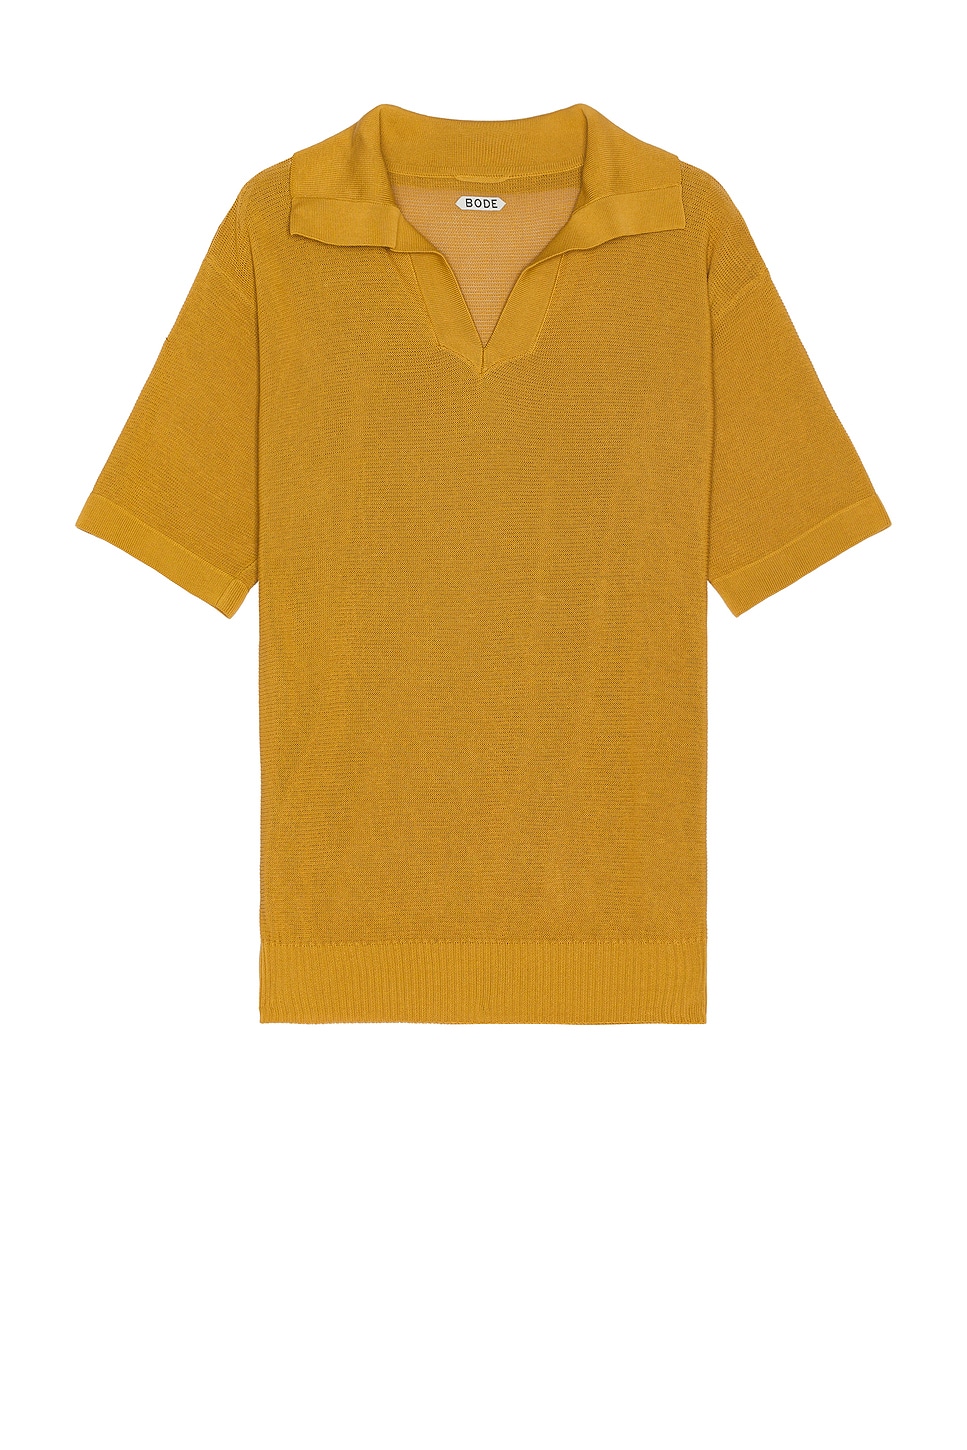 Image 1 of BODE Boxy Polo in Brown Yellow